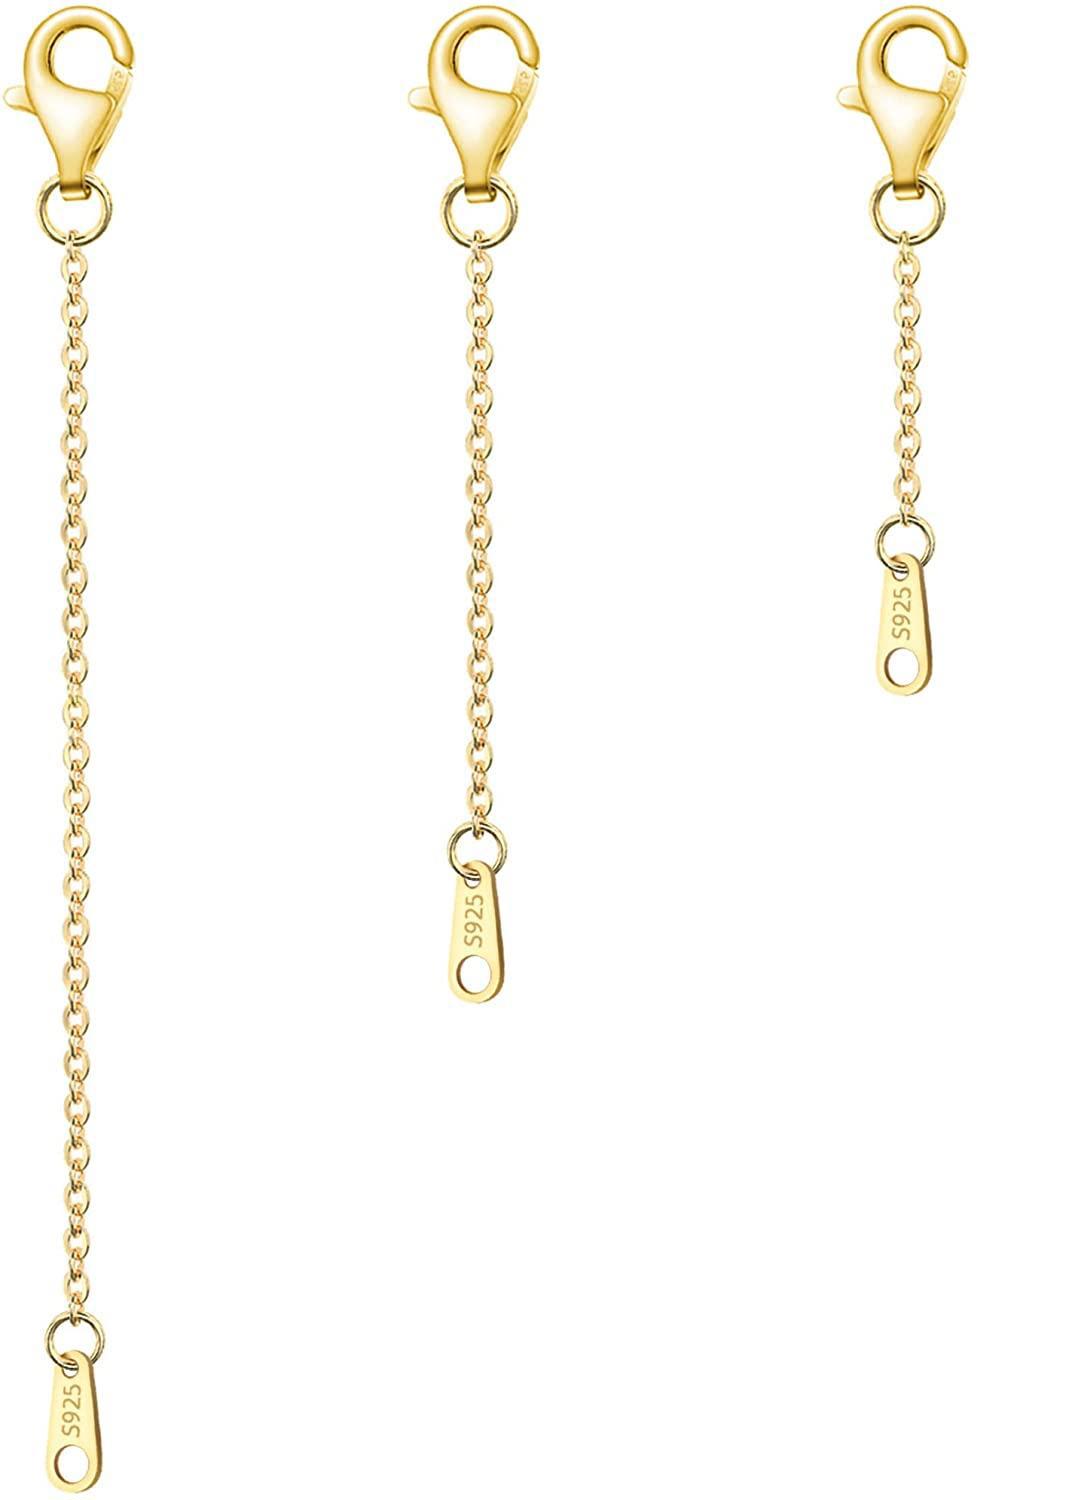 Necklace Extenders Gold Chain Extenders for Necklaces Extensions Sterling  Silver Bracelet Extender Gold Necklace Extenders for Women 3 Piece Set, 1 2  3 Inch 